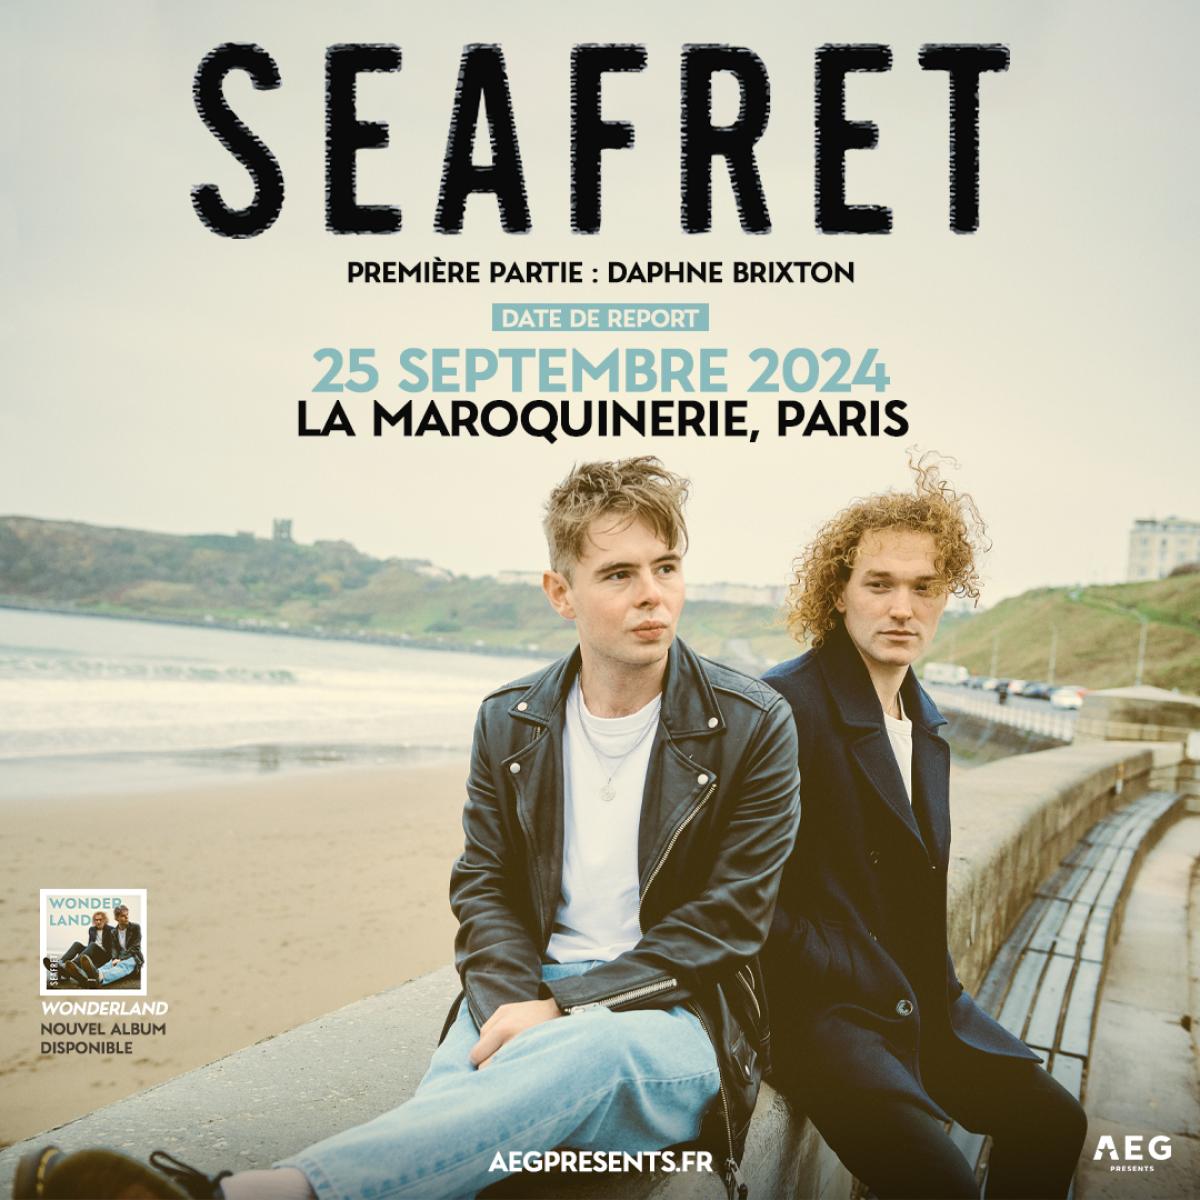 Seafret at La Maroquinerie Tickets